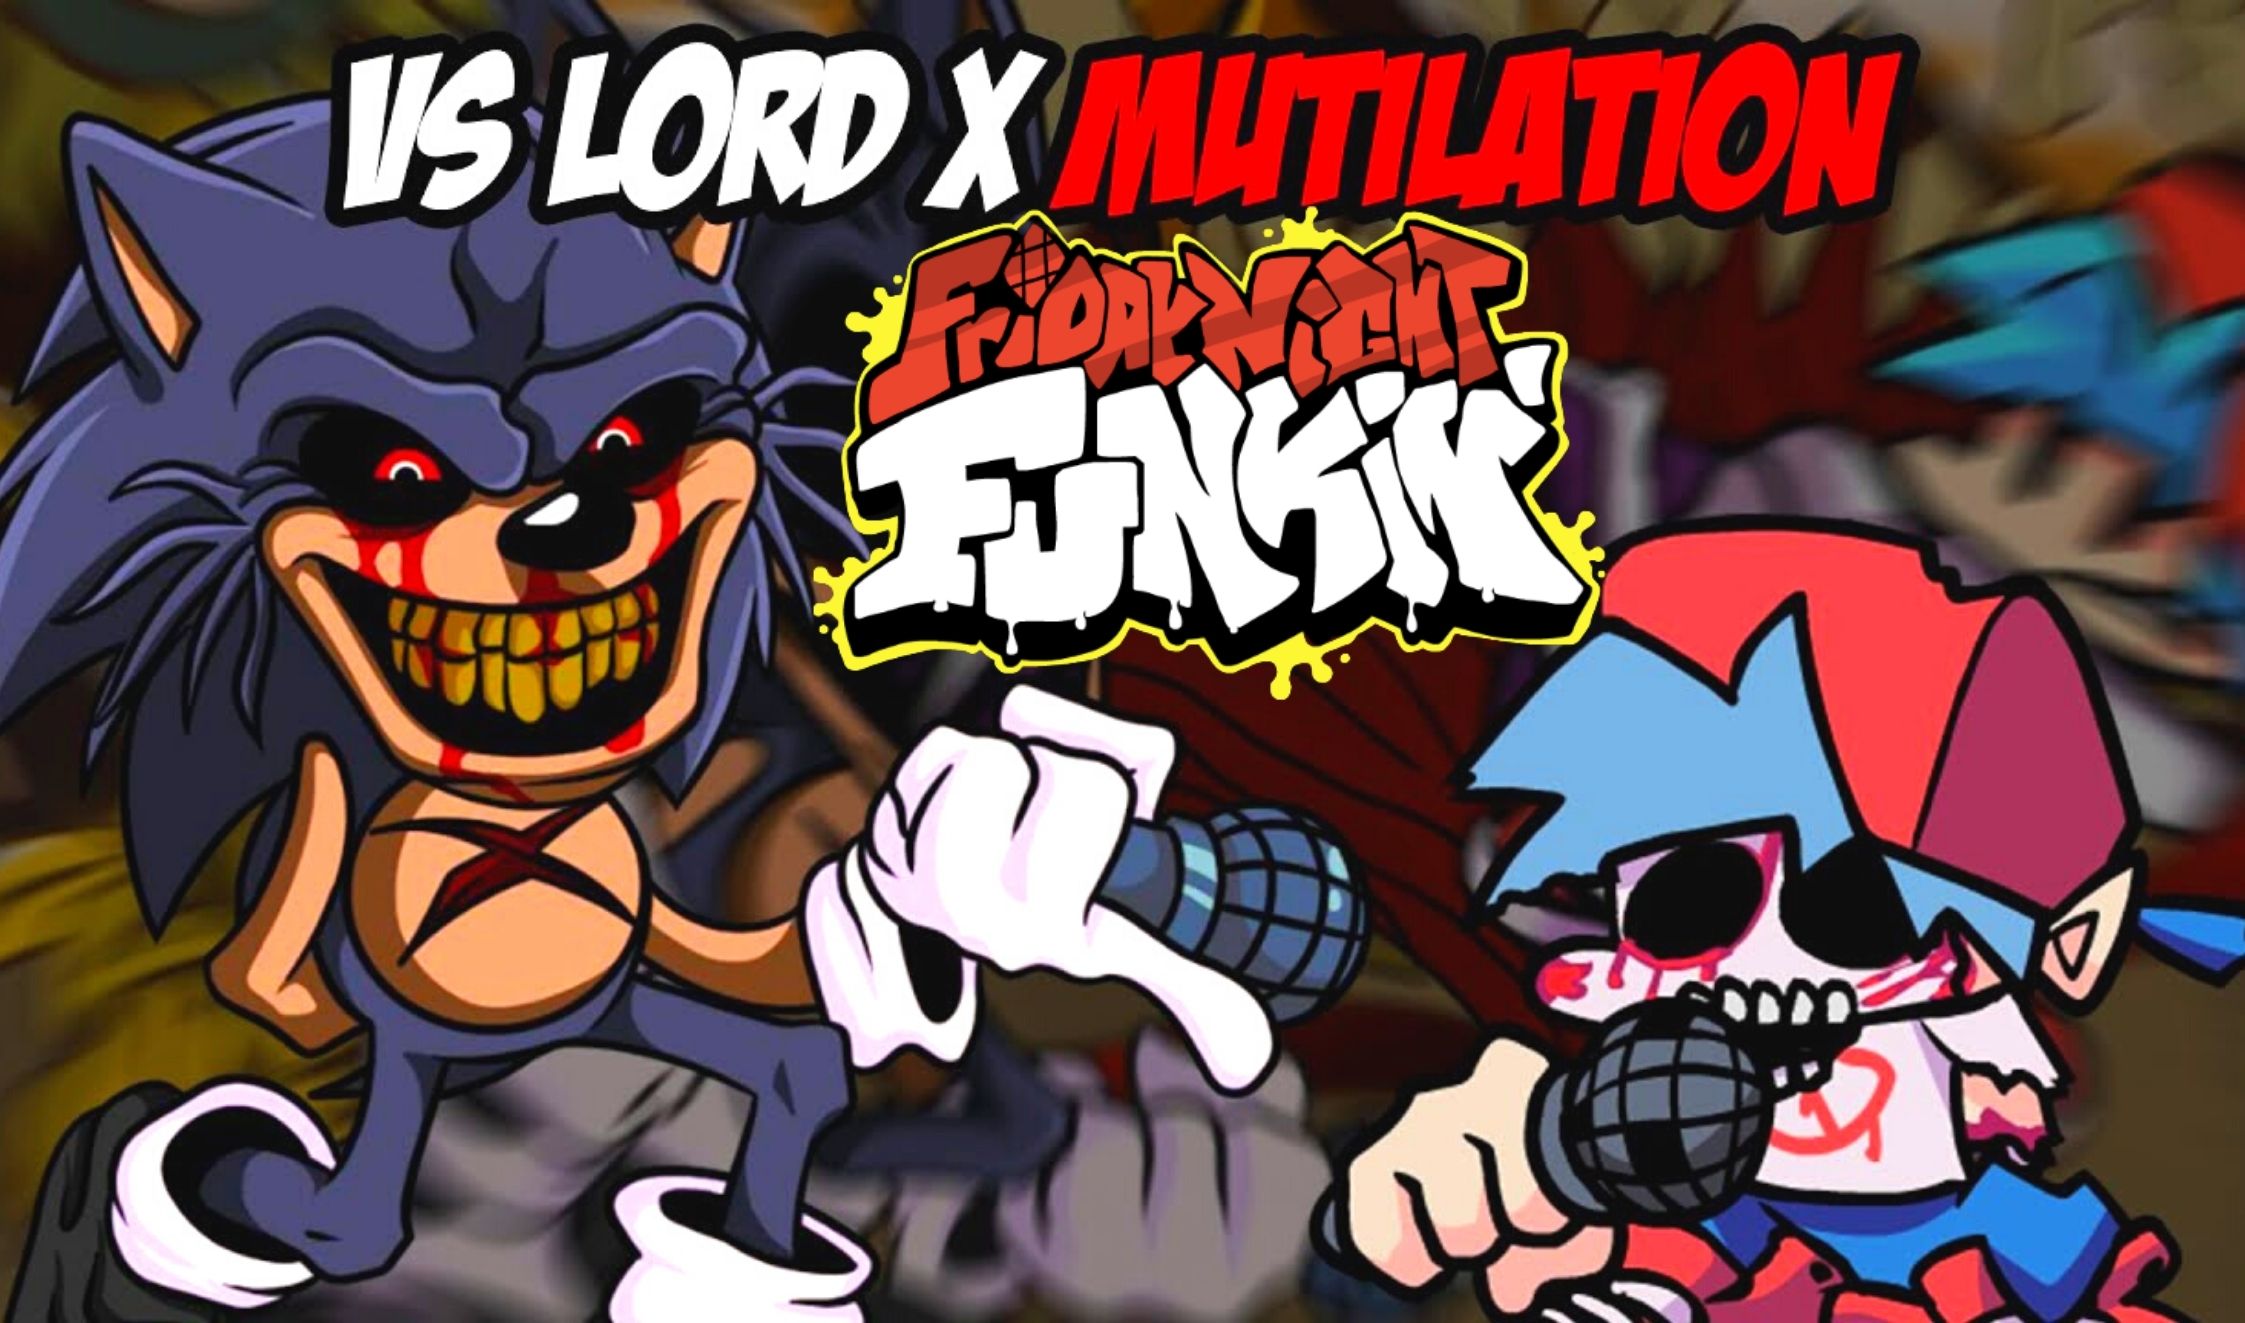 Based on the Lord X Mutilation mod, is the BF From halfway through the  song, stylized a tad bit, with his own icon. Enjoy! : r/FridayNightFunkin